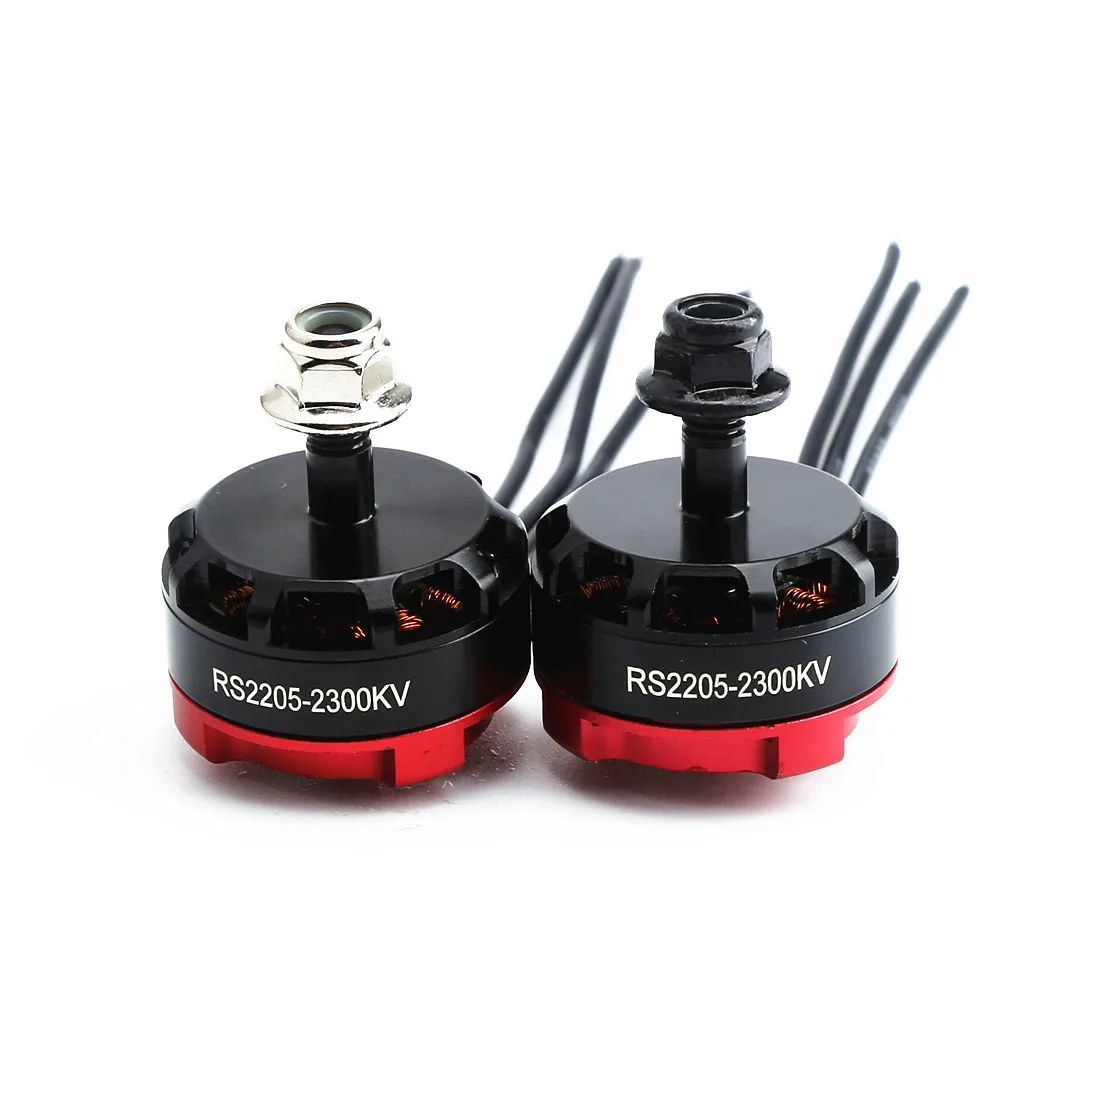 

2019 New RS2205 2300KV 2205 CW/CCW+30A ESC Brushless Motor for FPV Racing Quad Motor FPV Multicopter